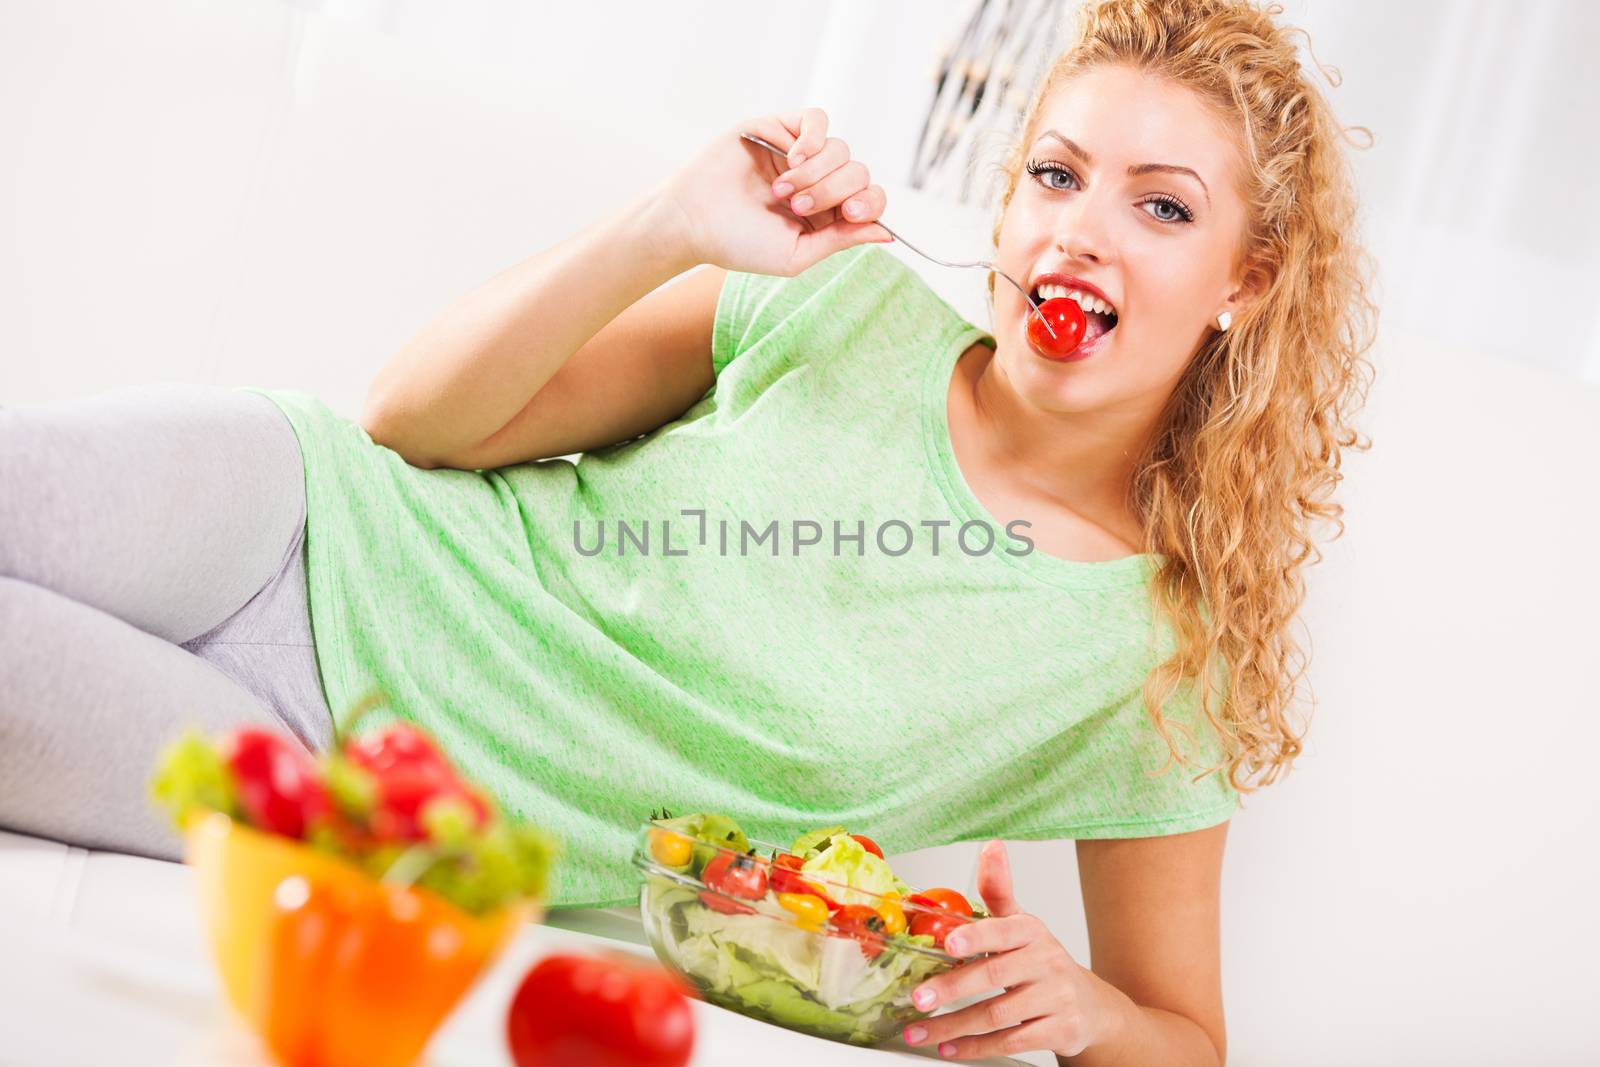 Beautiful young woman eating small tomato with fork